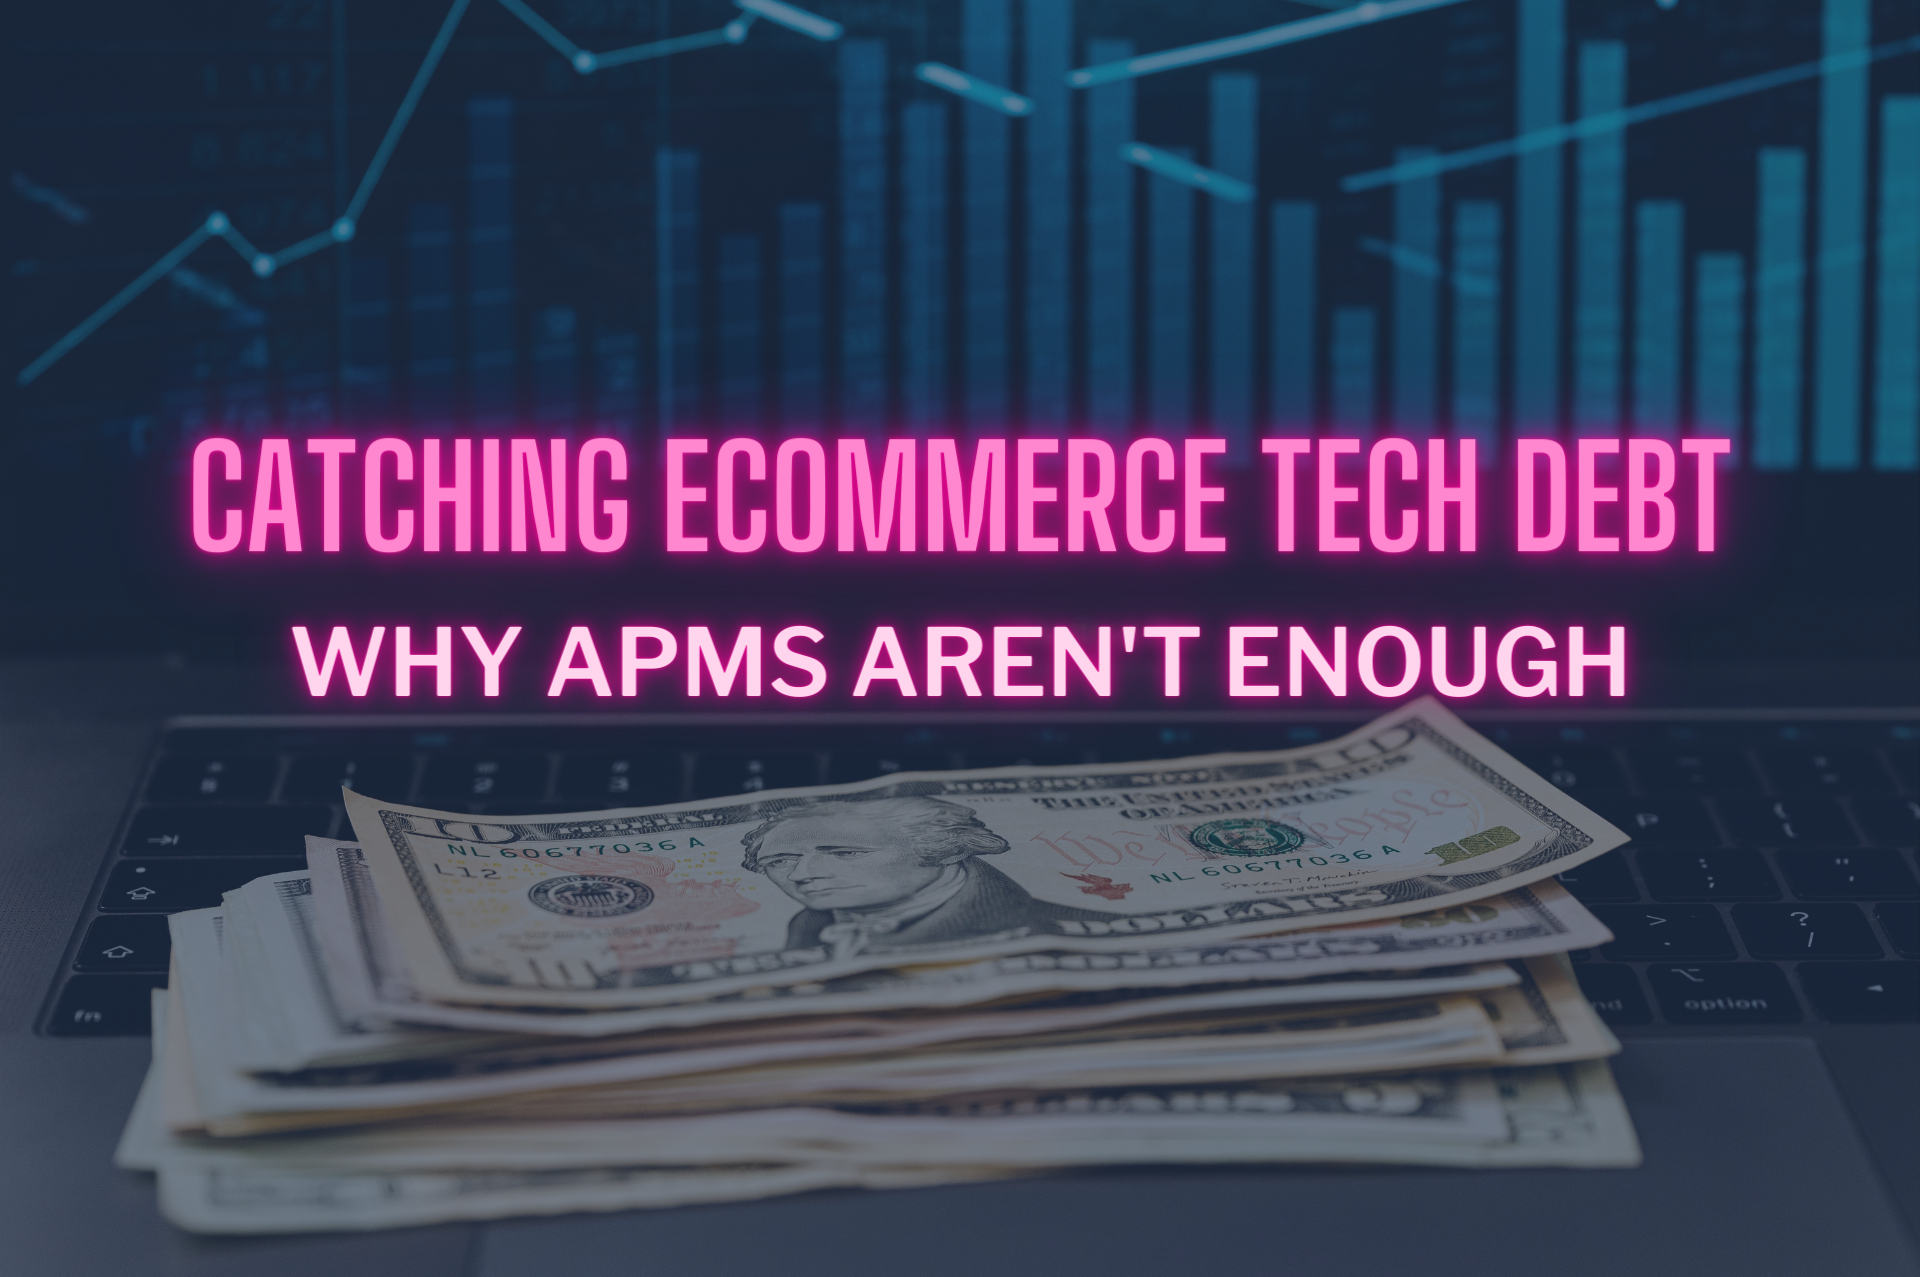 "Catching eCommerce Tech Debt - Why APMS Aren't Enough" Overlayed in front of a laptop with a blue bar graph and a stack of $10 USD bills